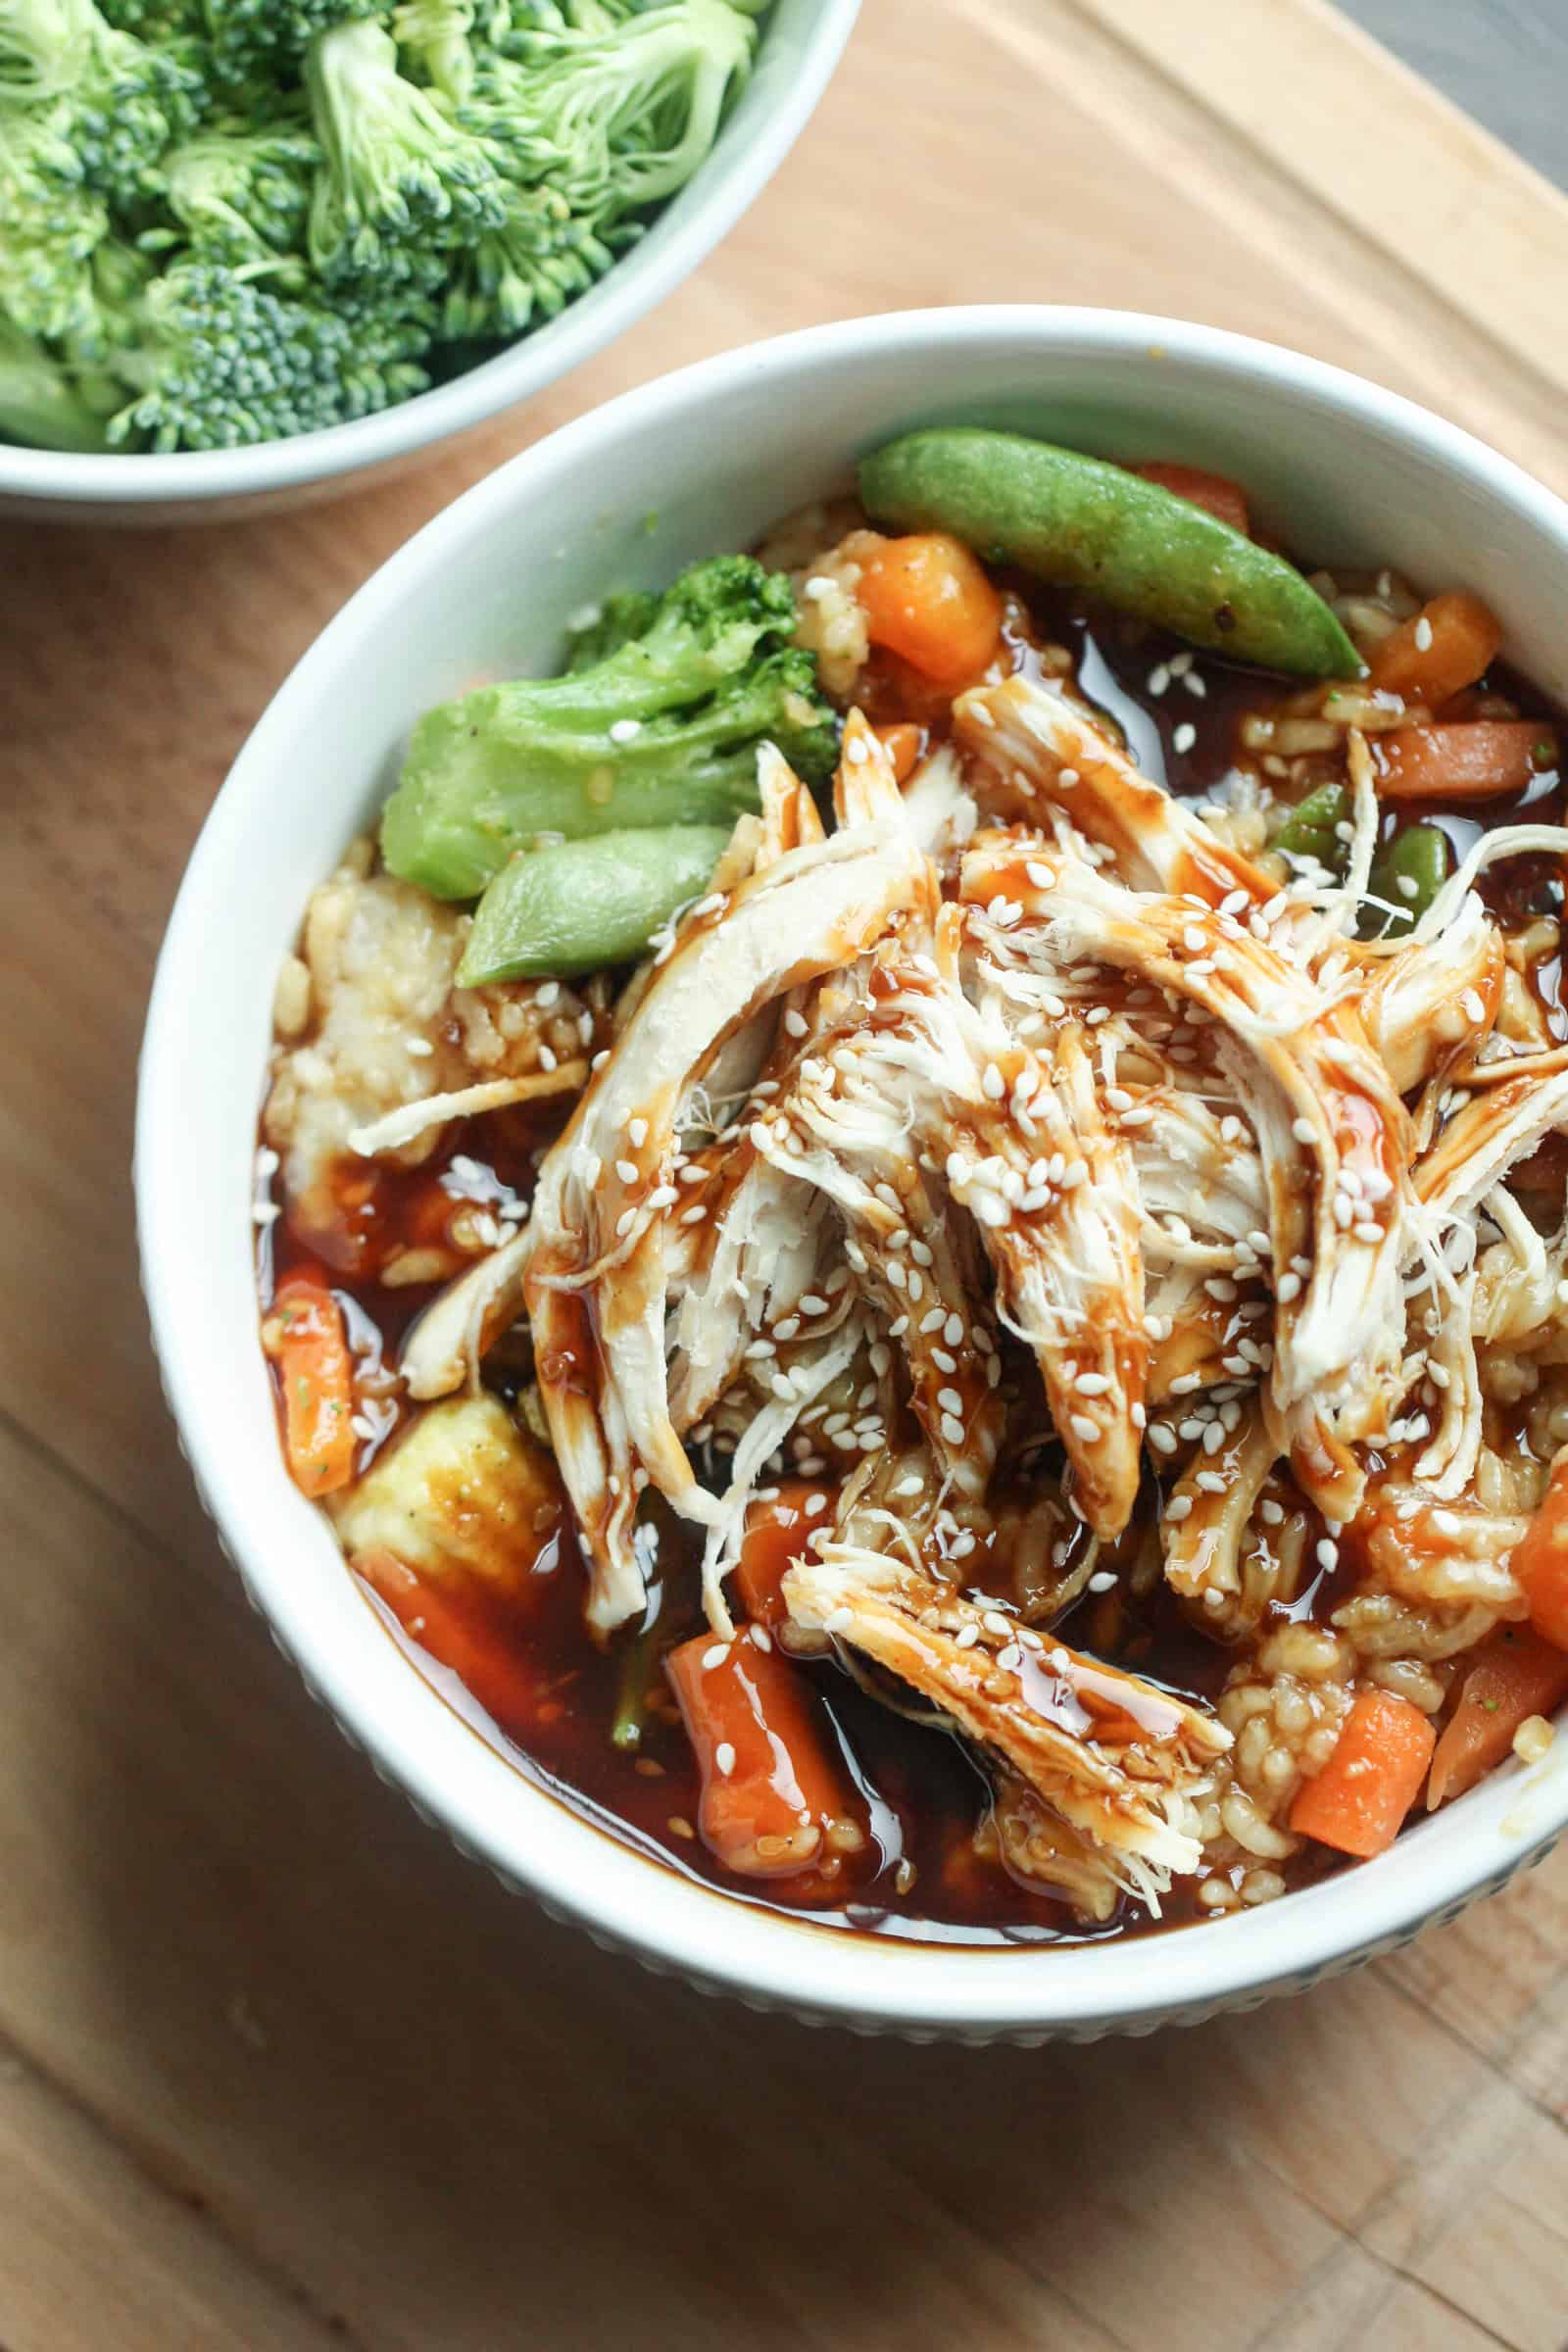 https://www.sixsistersstuff.com/wp-content/uploads/2020/03/Teriyaki-Chicken-Bowls-plated-Instant-Pot-from-above-1-of-1.jpg